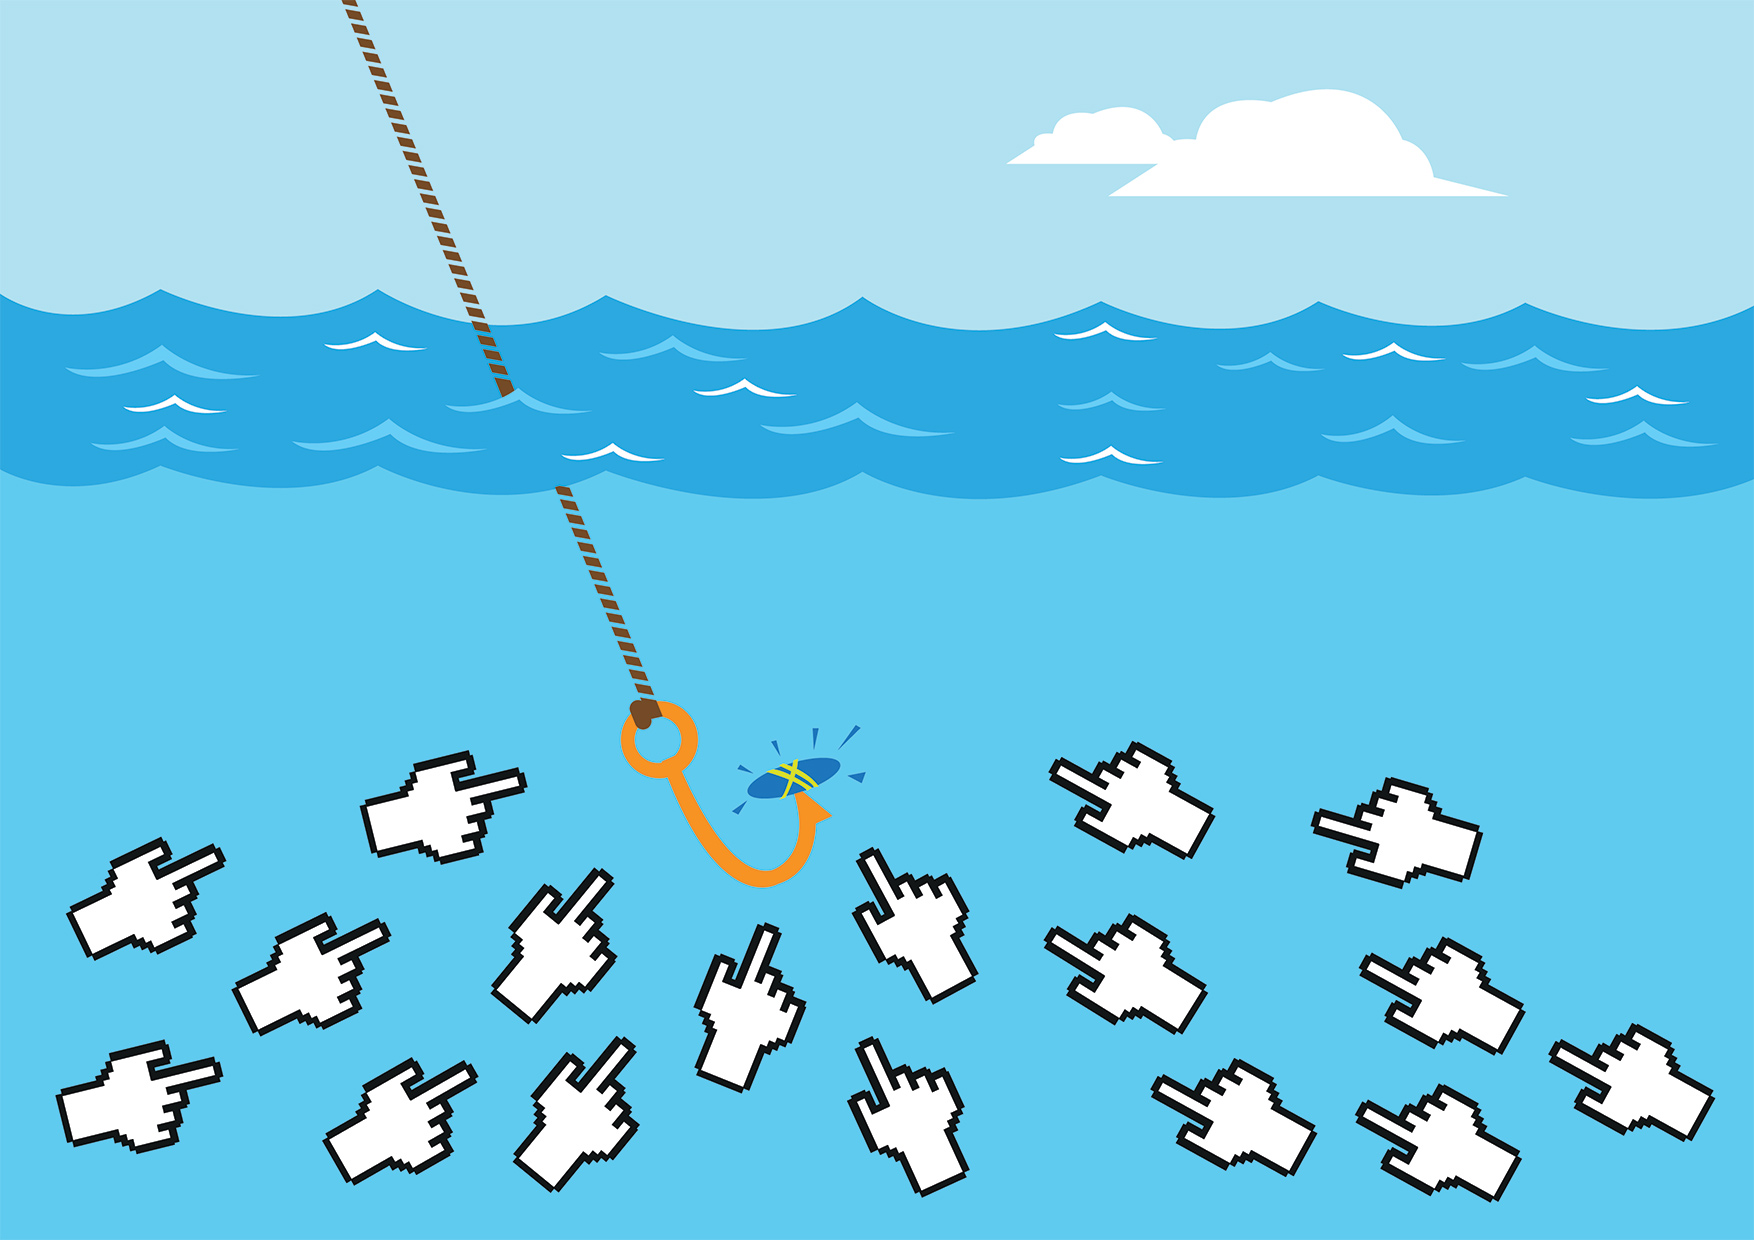 Depicting clickbait content. Fishing hook drawing mouse cursors.